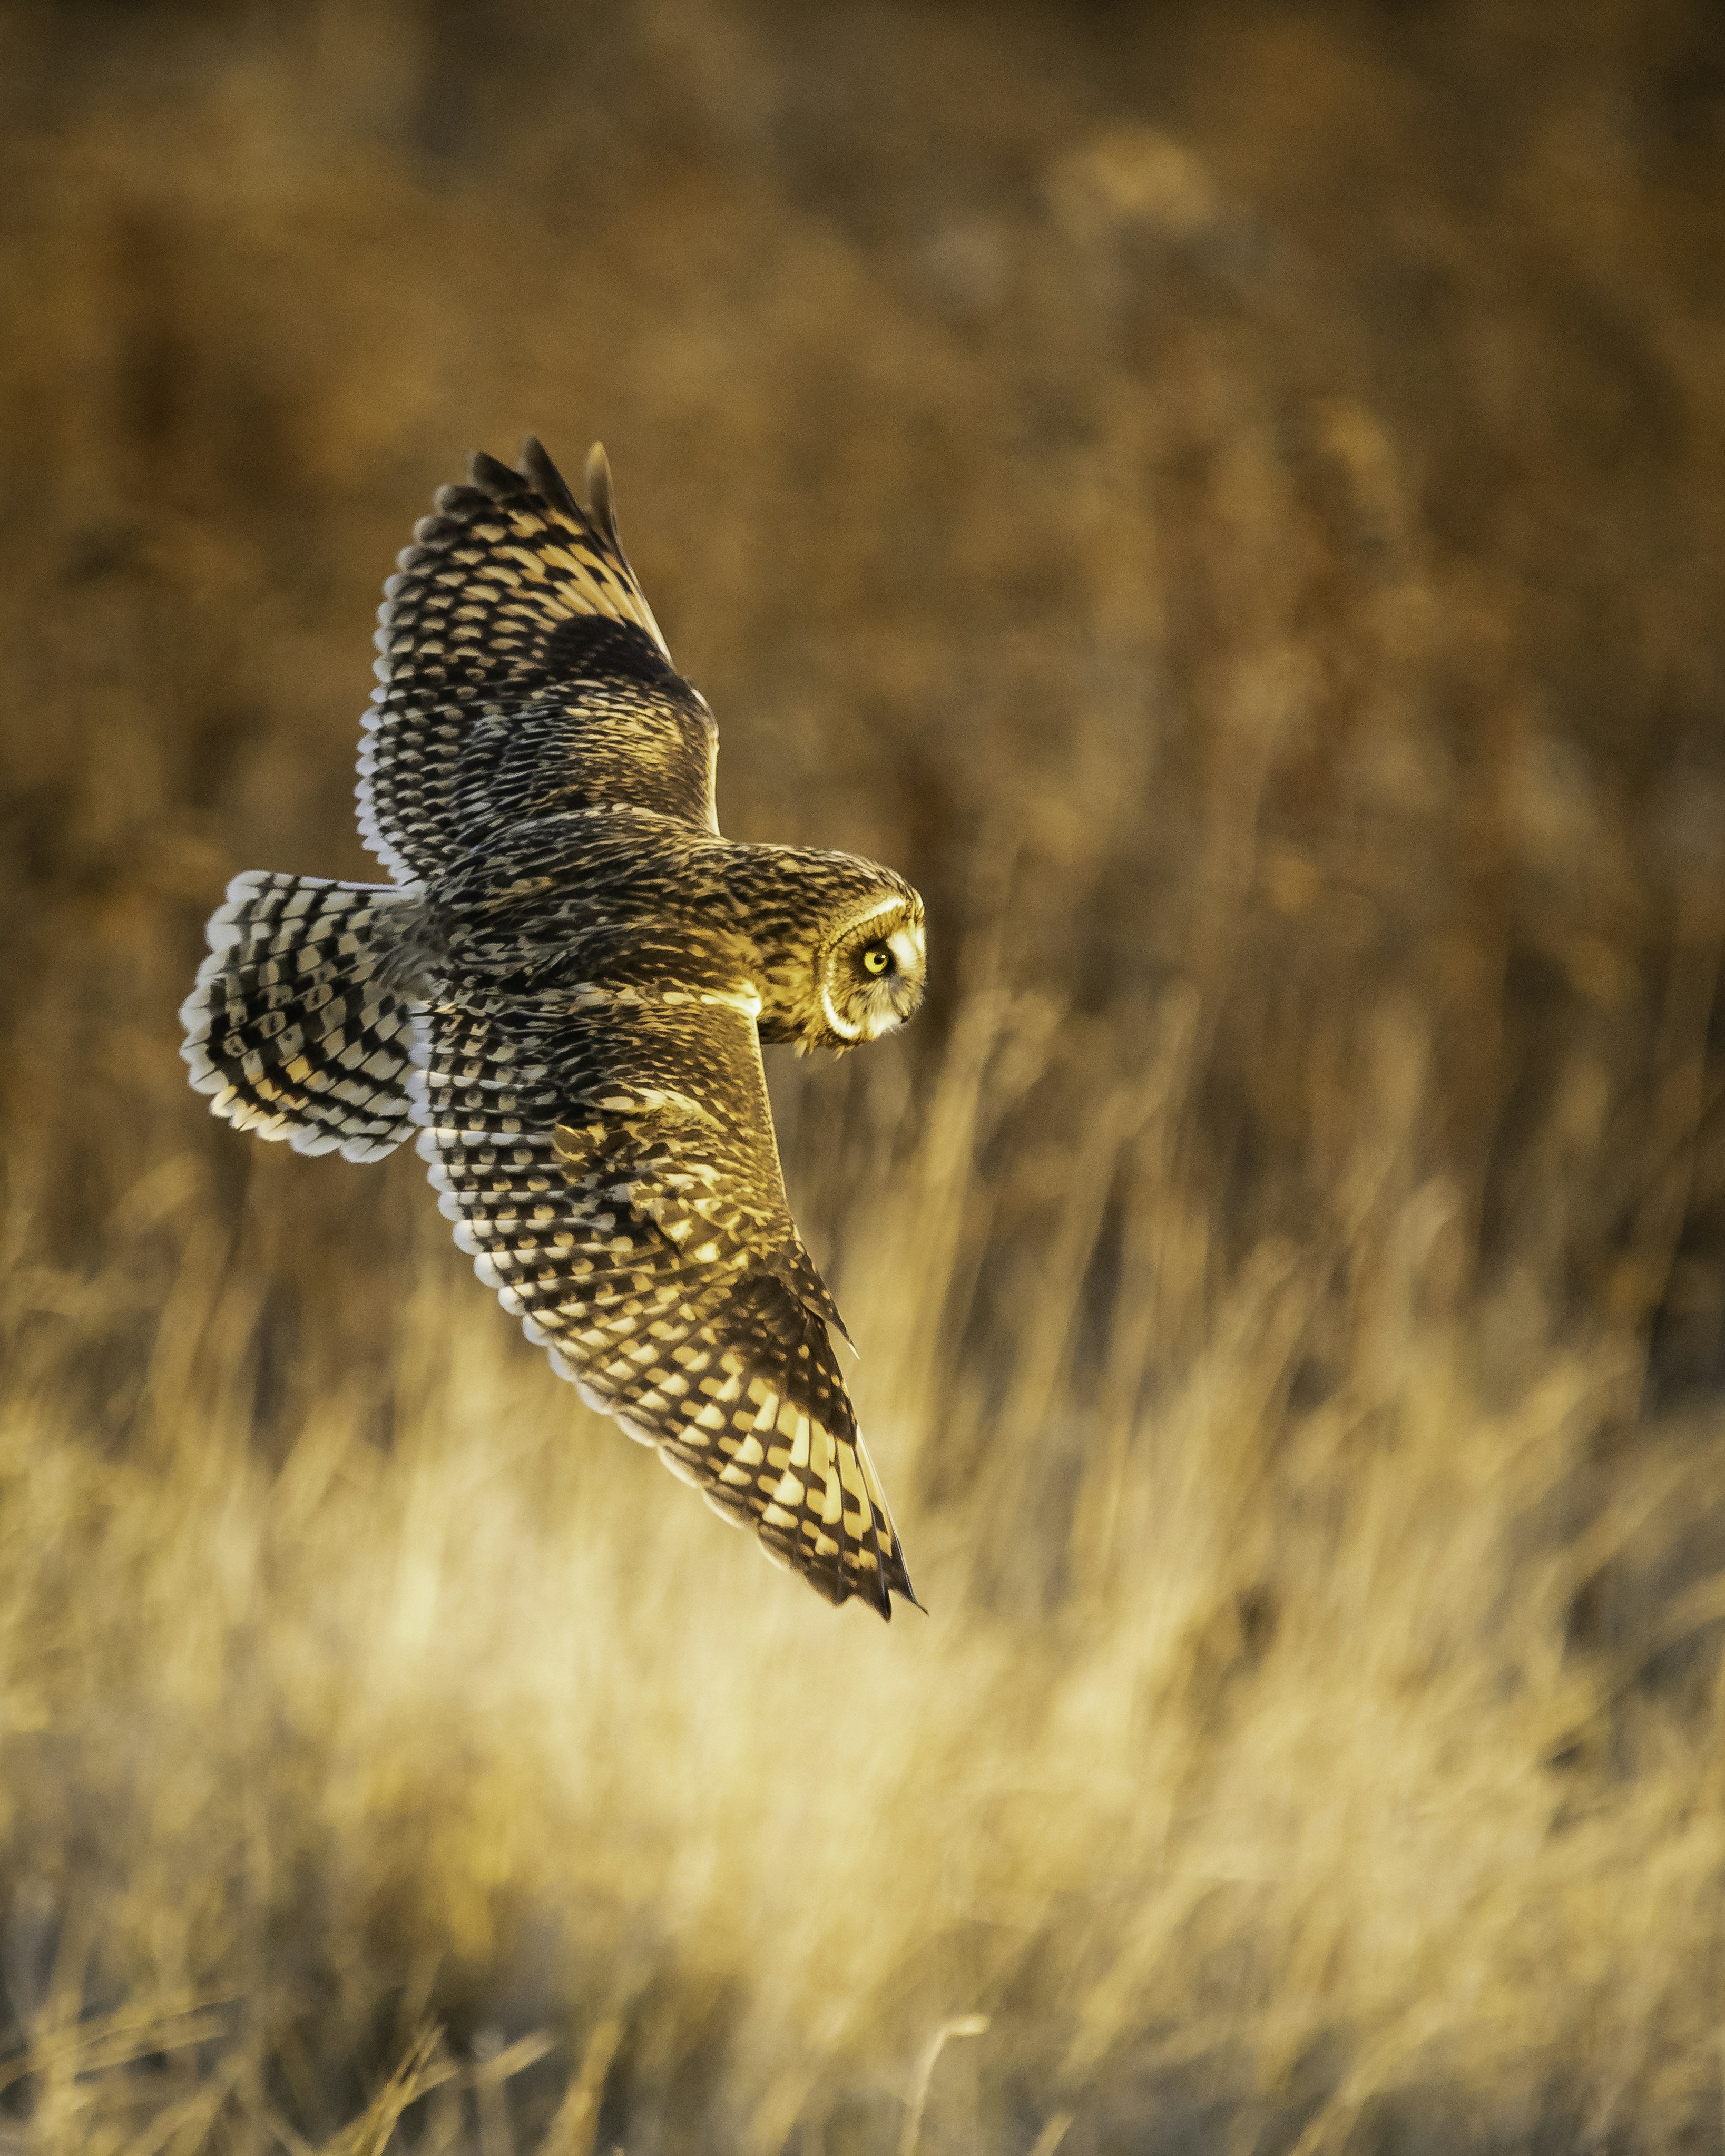 Short eared owl wings.</p>
<p>” style=”max-width:440px;float:left;padding:10px 10px 10px 0px;border:0px;”></p>
	</div><!-- .entry-content -->

	<footer class=